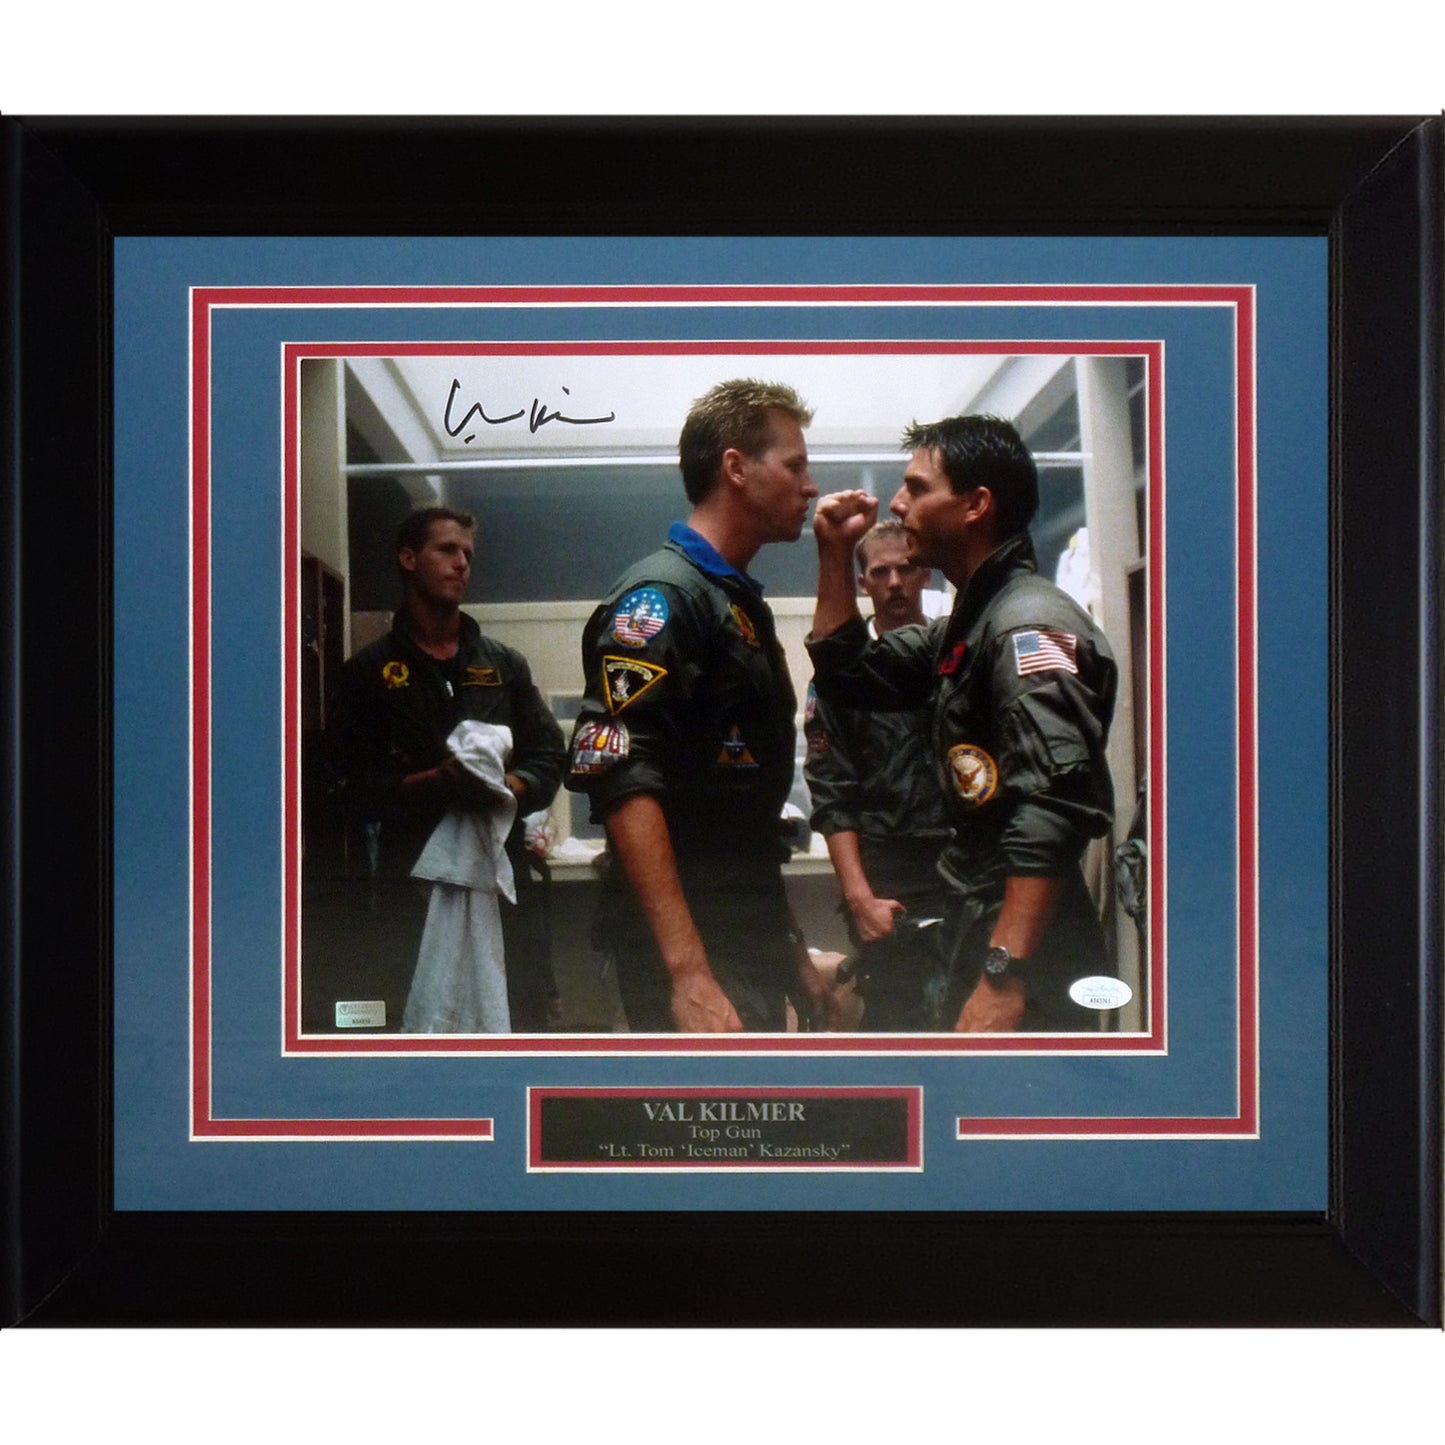 Val Kilmer Autographed TOP GUN (with Tom Cruise) Deluxe Framed 11x14 Photo - JSA